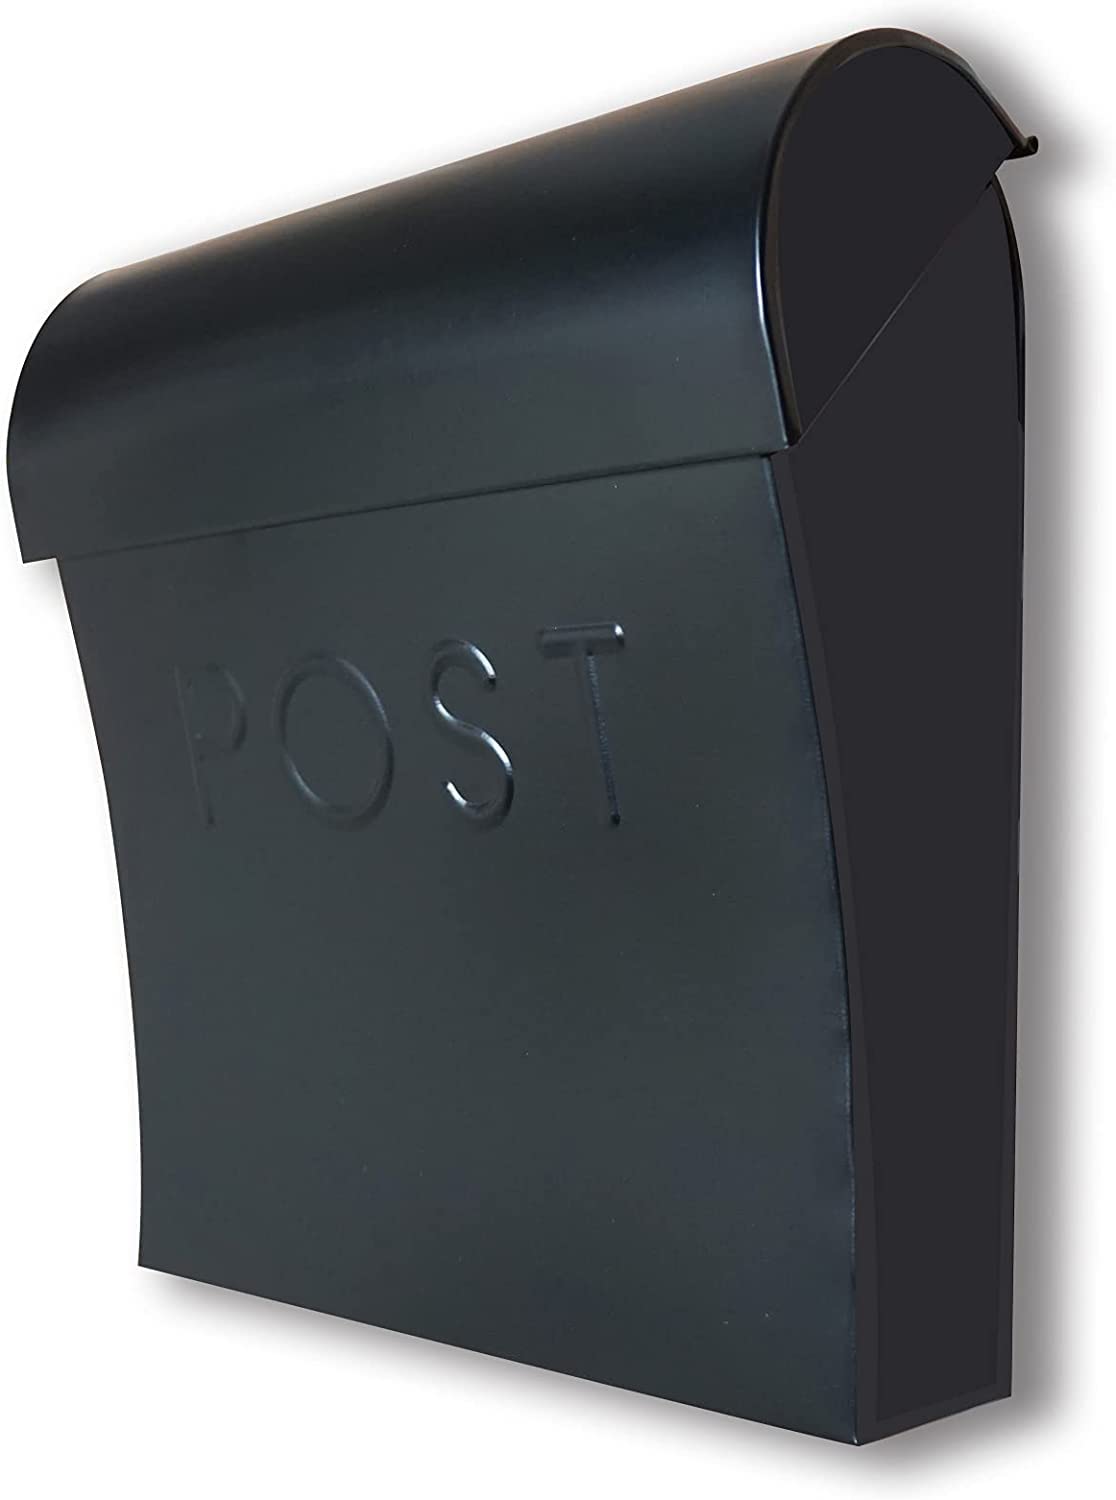 NACH Vicki Black Mailbox, Wall Mount Mailboxes for Outside, Weather Resistant Metal Mailbox, Maximum Rust Protection, 11x4.5x12.